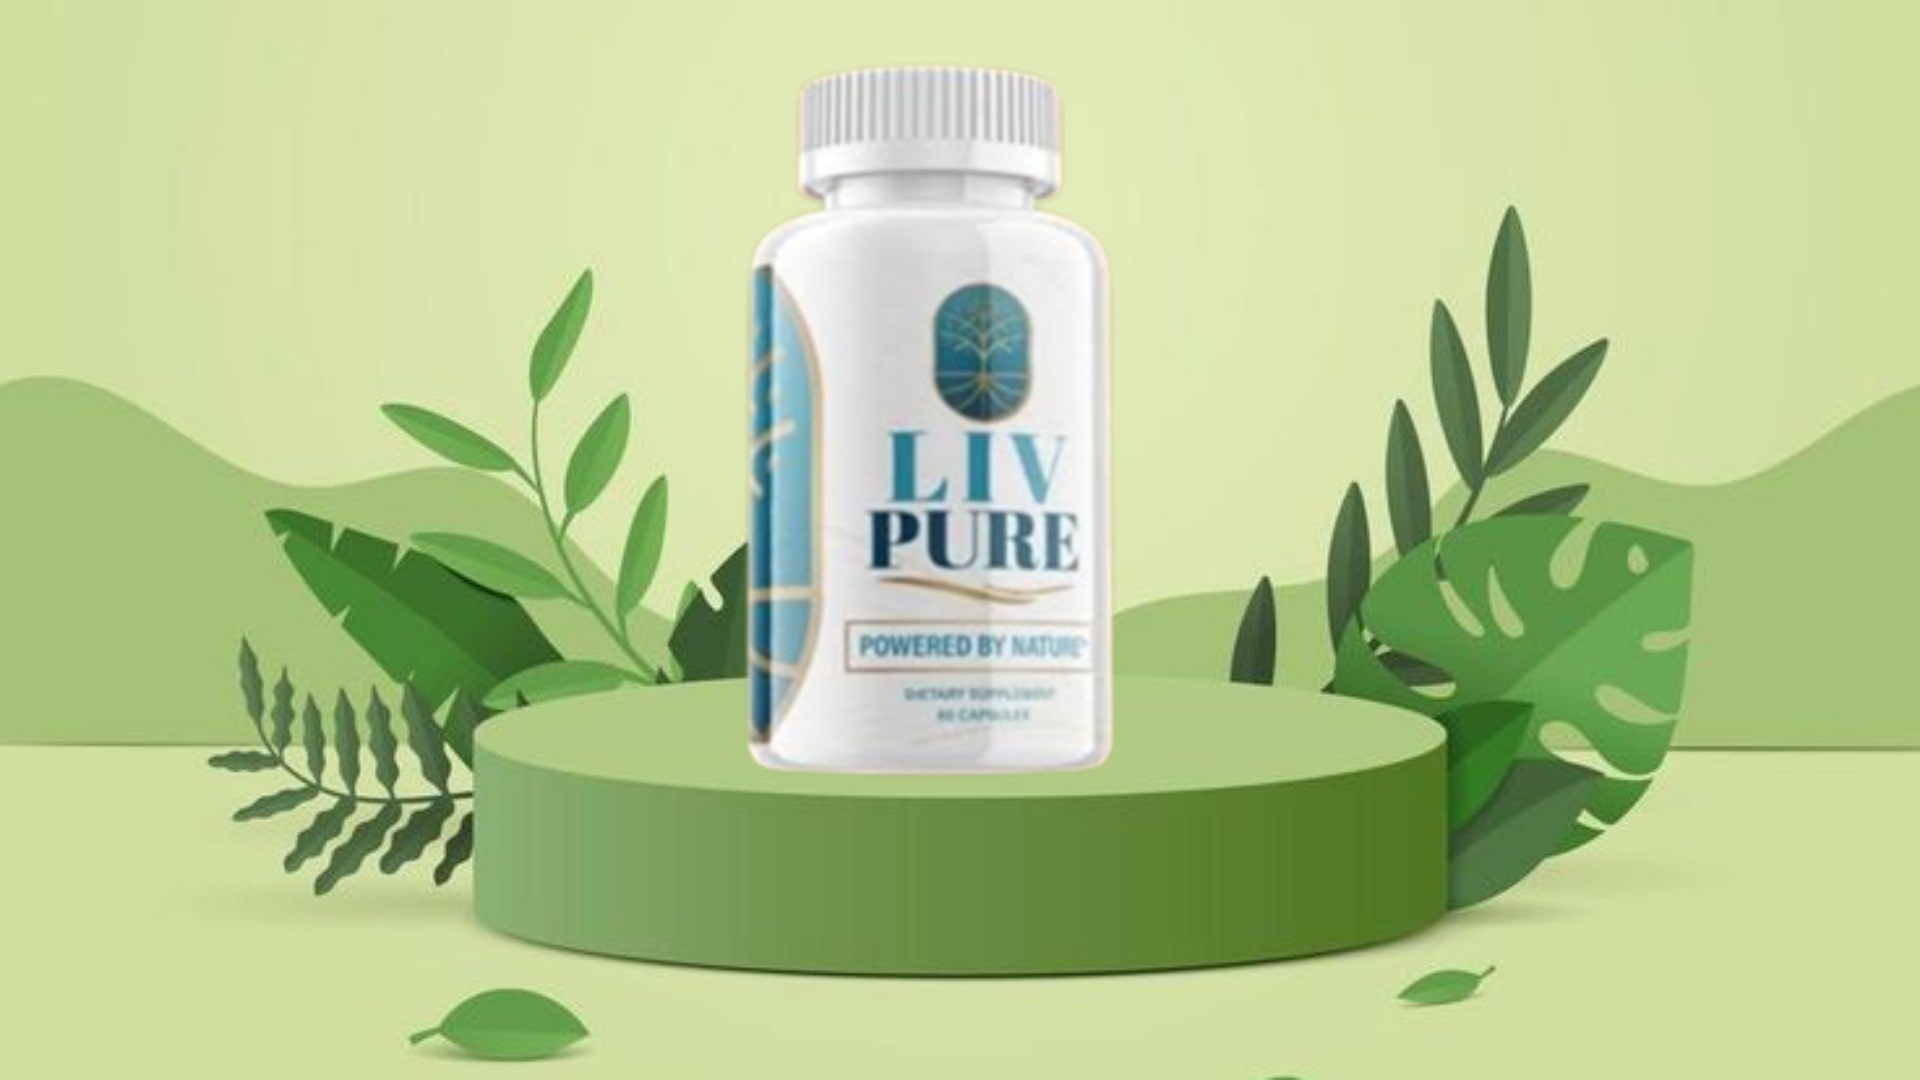 Reviews of Liv Pure (Real Truth Exposed): The Real Story Behind These Weight Loss Pills